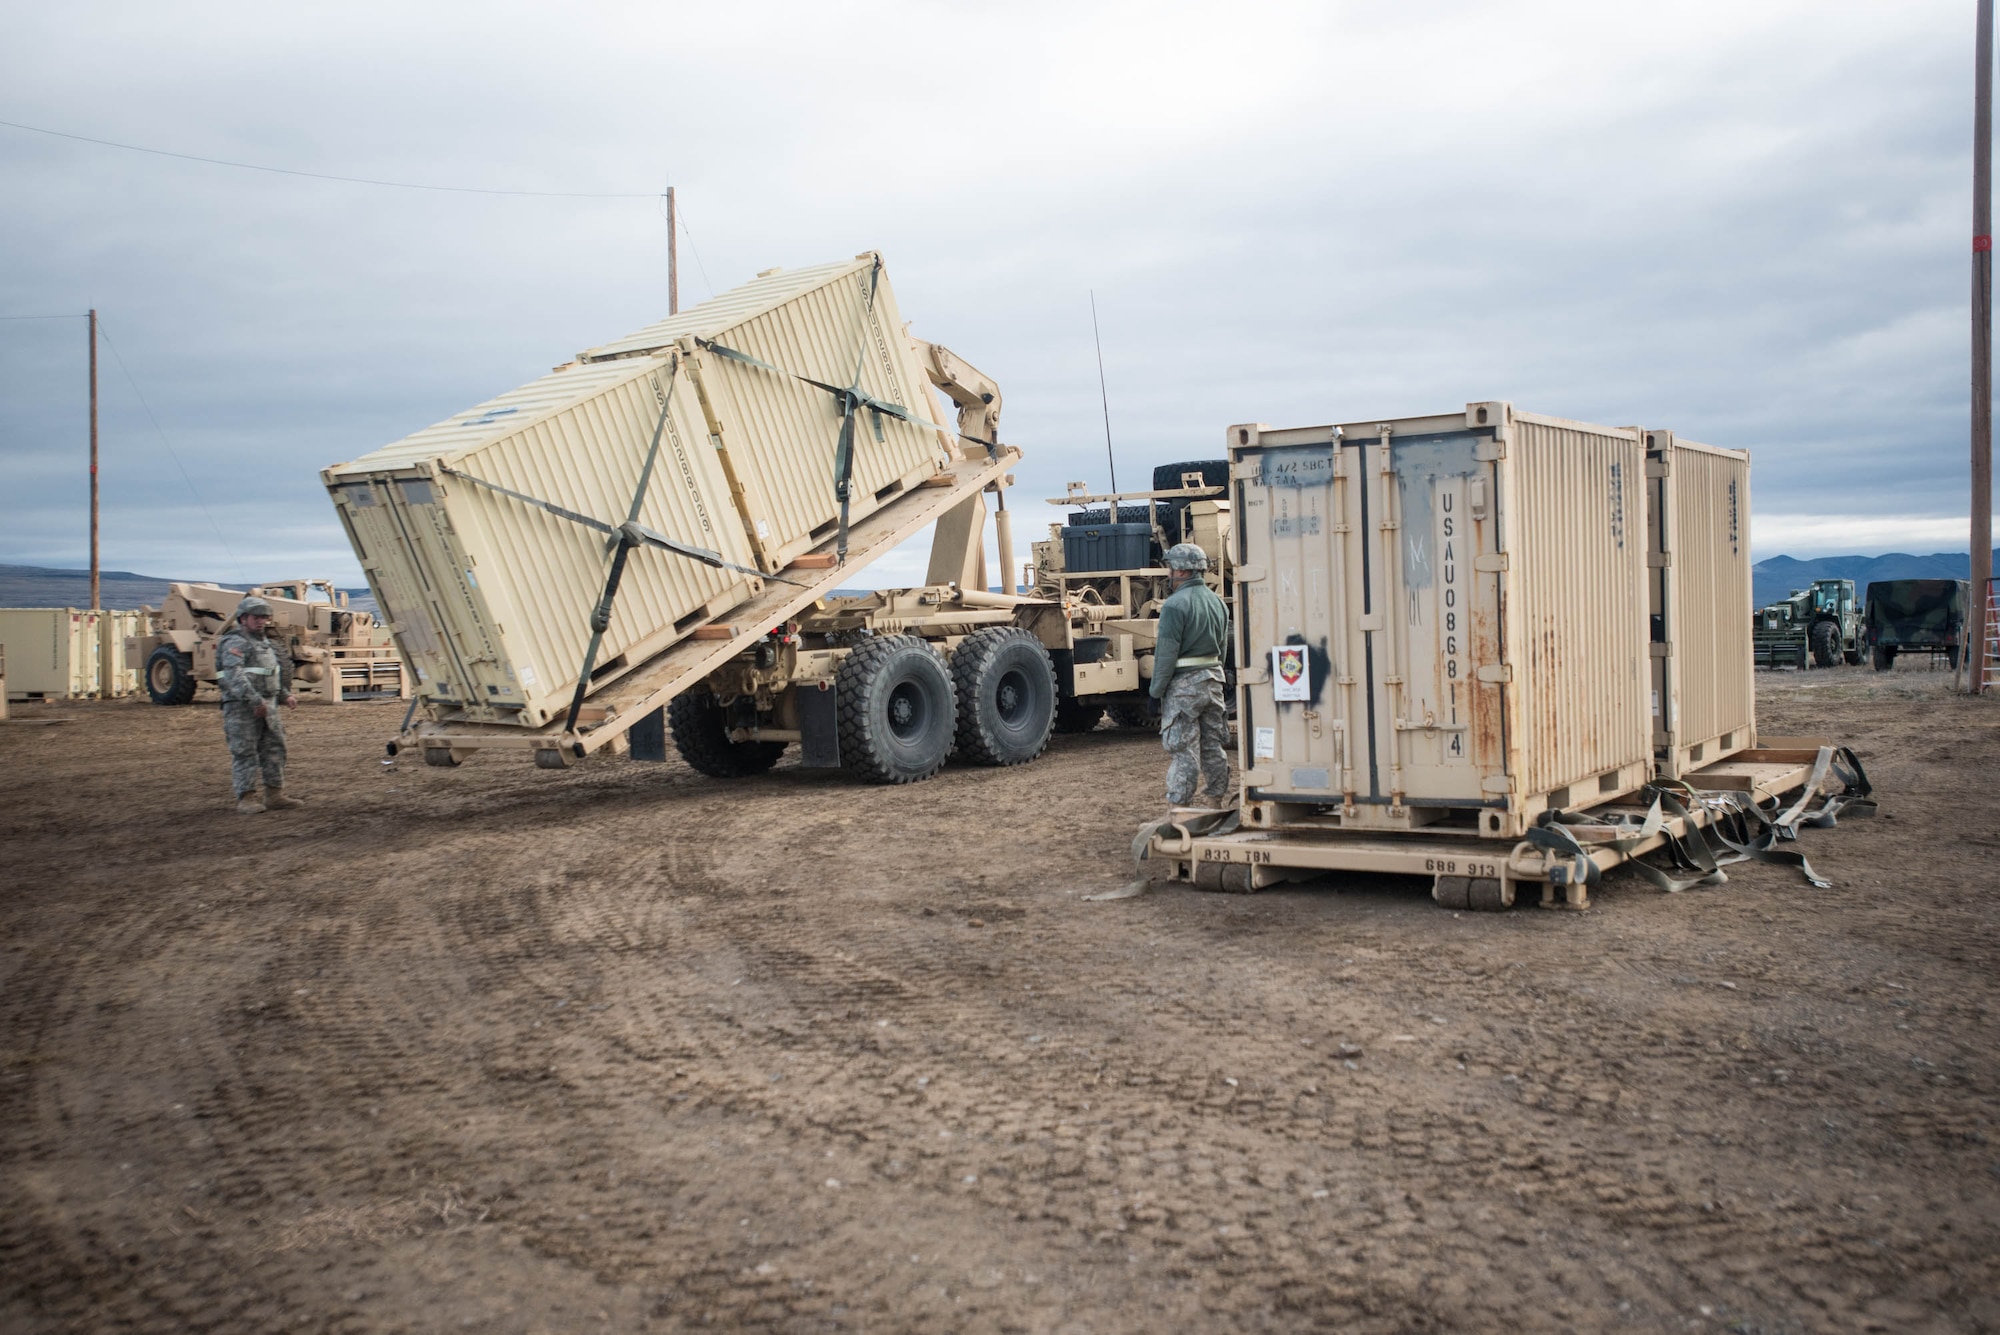 Soldiers from the U.S. Army’s 688th Rapid Port Opening Element use a Load Handling System to unload cargo at the forward operating node at Amedee Army Airfield, Calif., on March 9, 2016. The 688th RPOE is working in conjunction with the Kentucky Air National Guard’s 123rd Contingency Response Group and a team from the Defense Logistics Agency to operate Joint Task Force-Port Opening Sangala during a week-long exercise called Operation Lumberjack. The objective of the JTF-PO is to establish an aerial port of debarkation, provide initial distribution capability and set up warehousing for distribution beyond the forward node. (Kentucky Air National Guard photo by Master Sgt. Phil Speck)